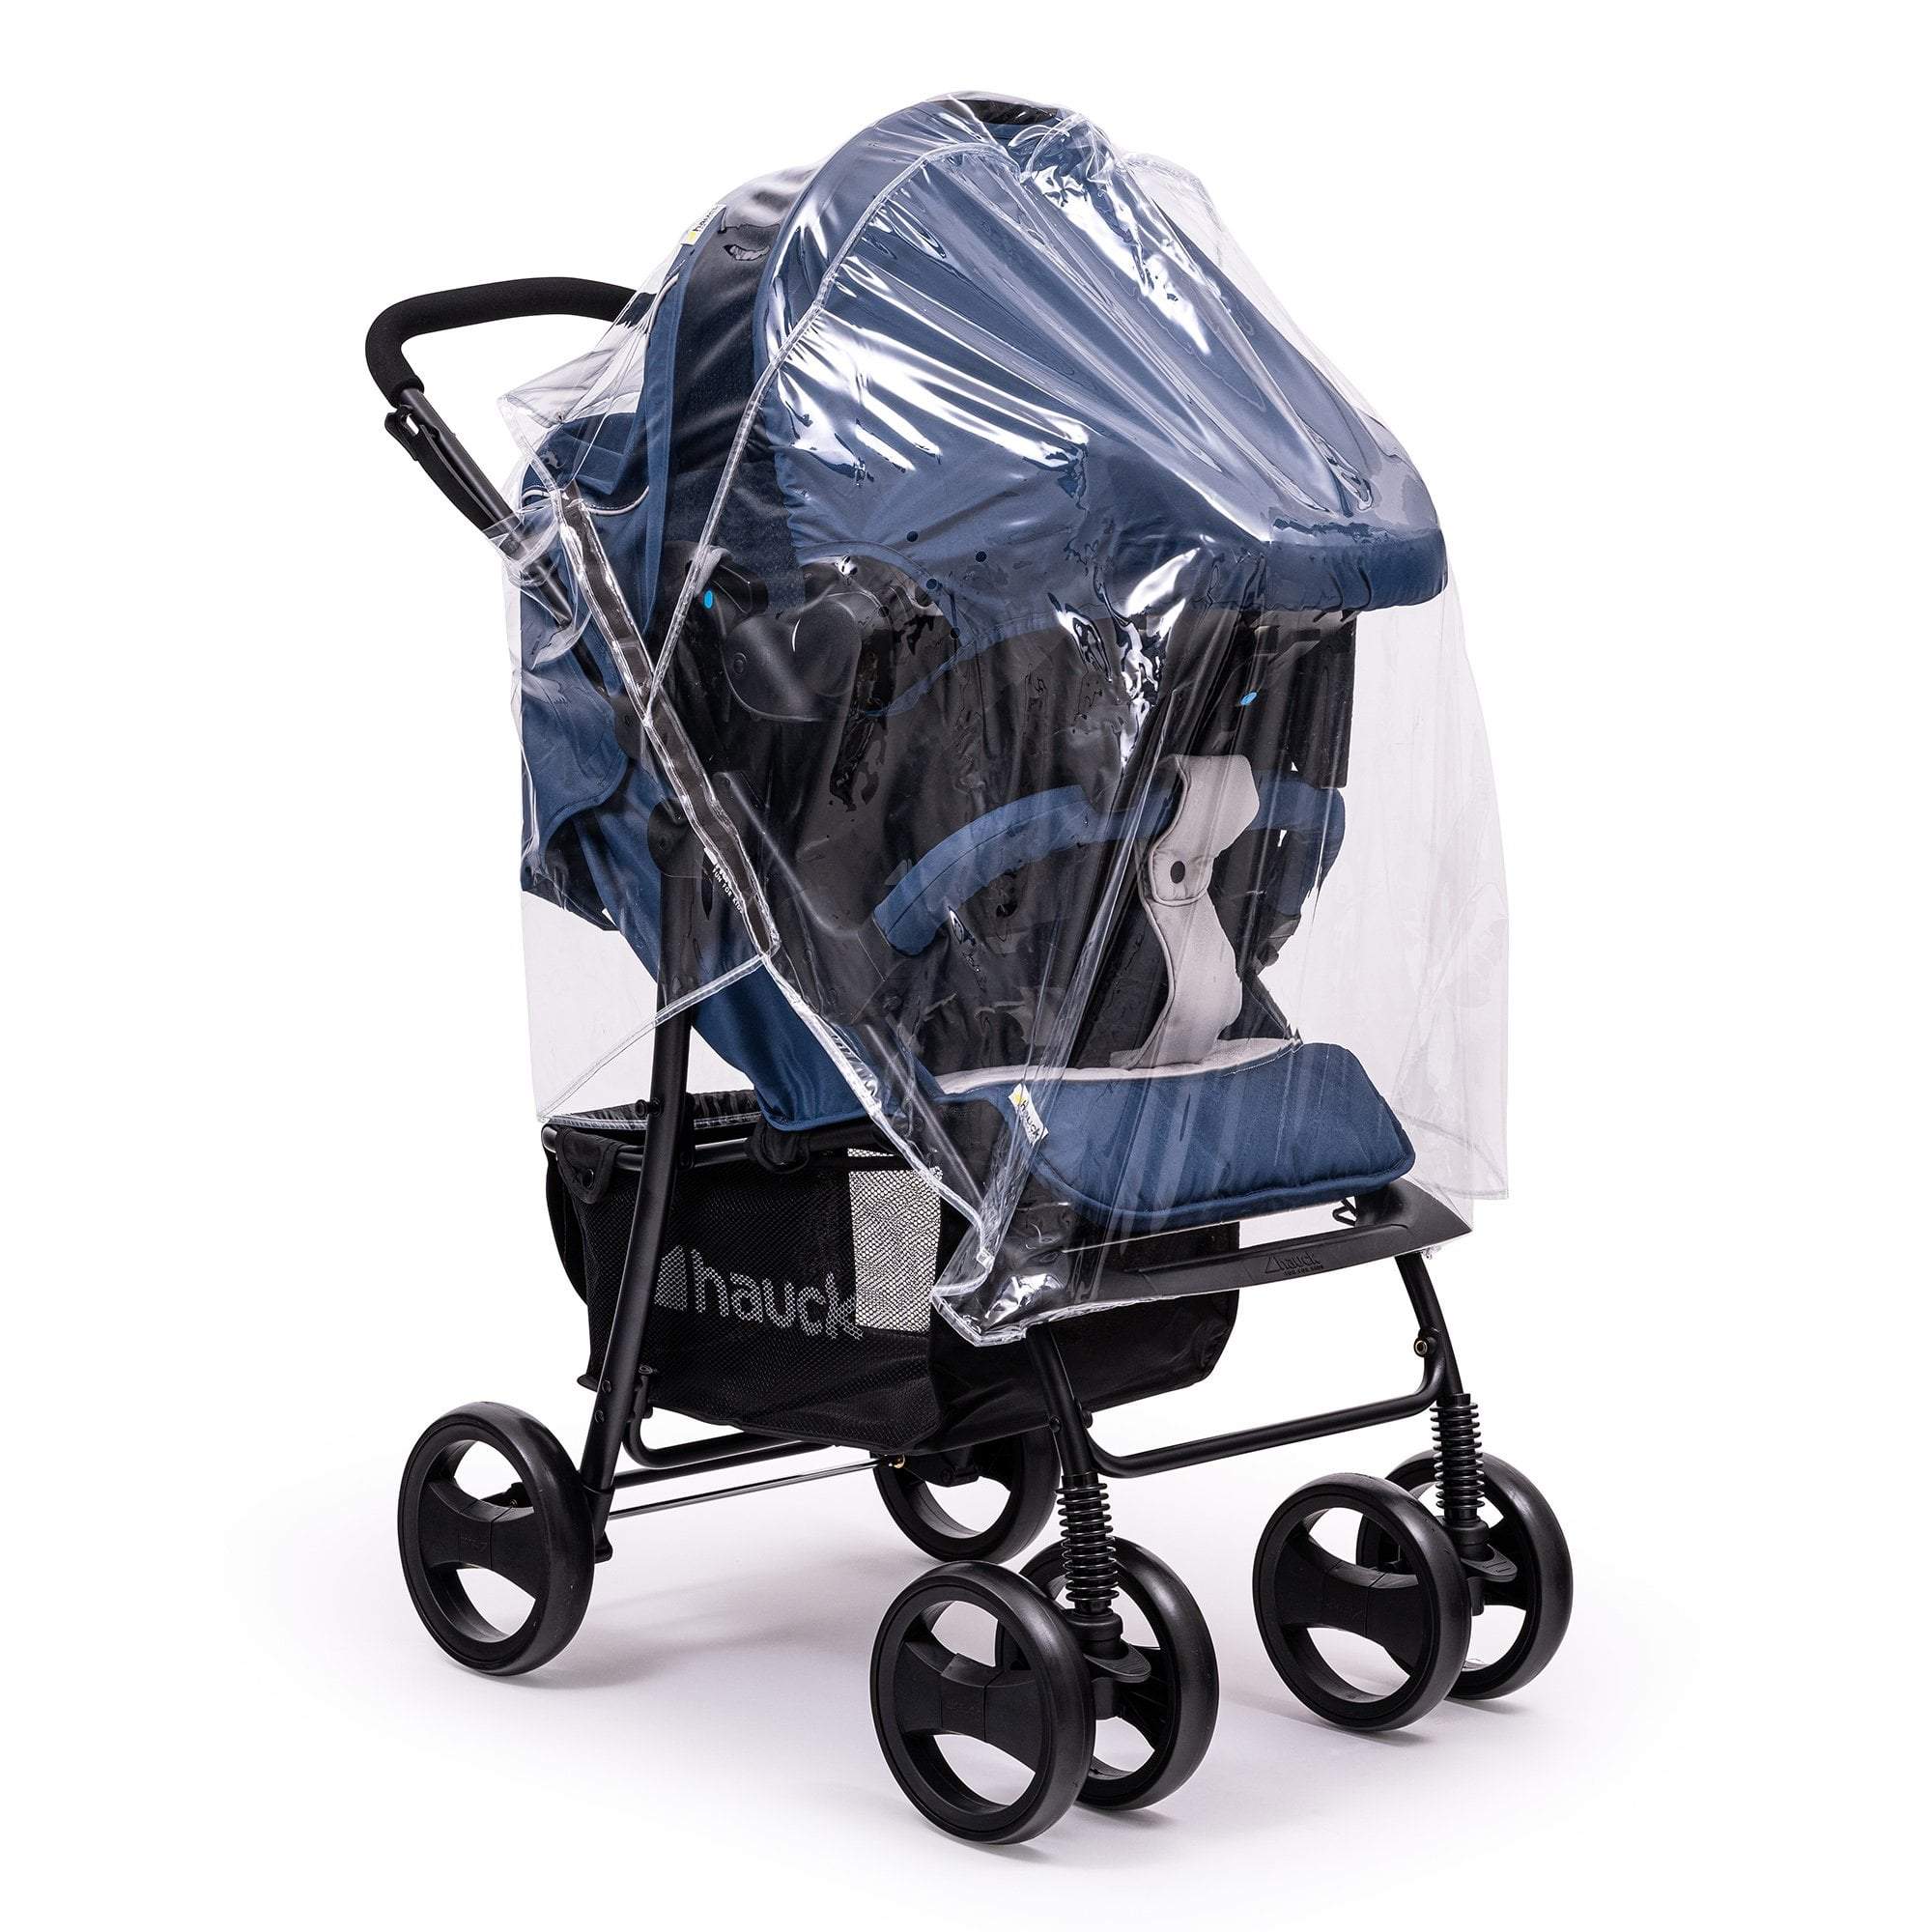 Travel System Raincover Compatible with Red Castle - Fits All Models - For Your Little One